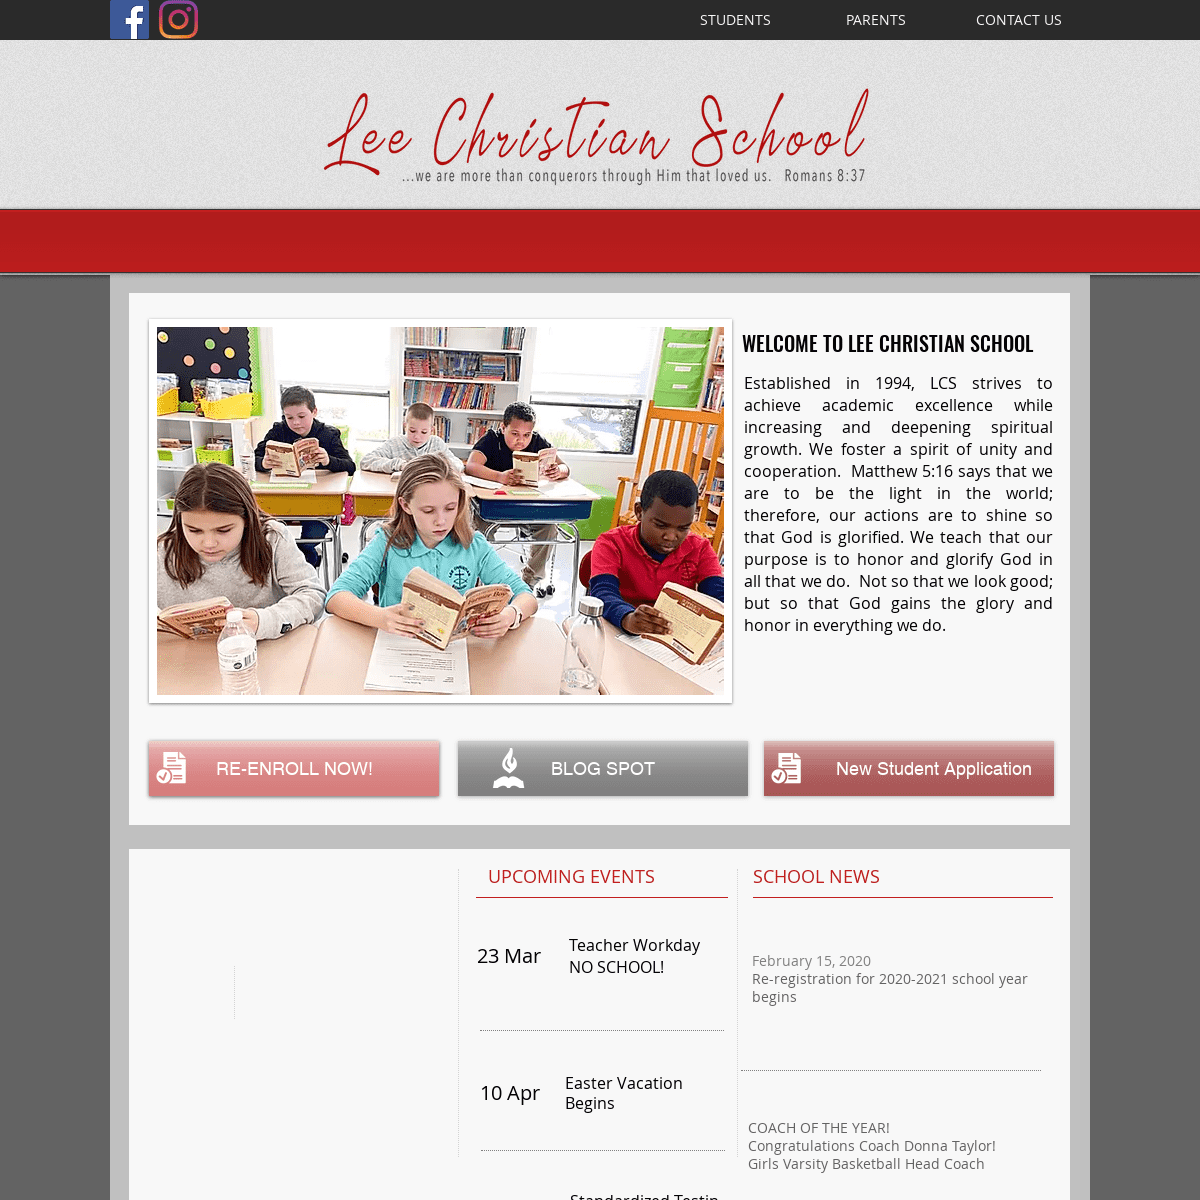 A complete backup of leechristianschool.org